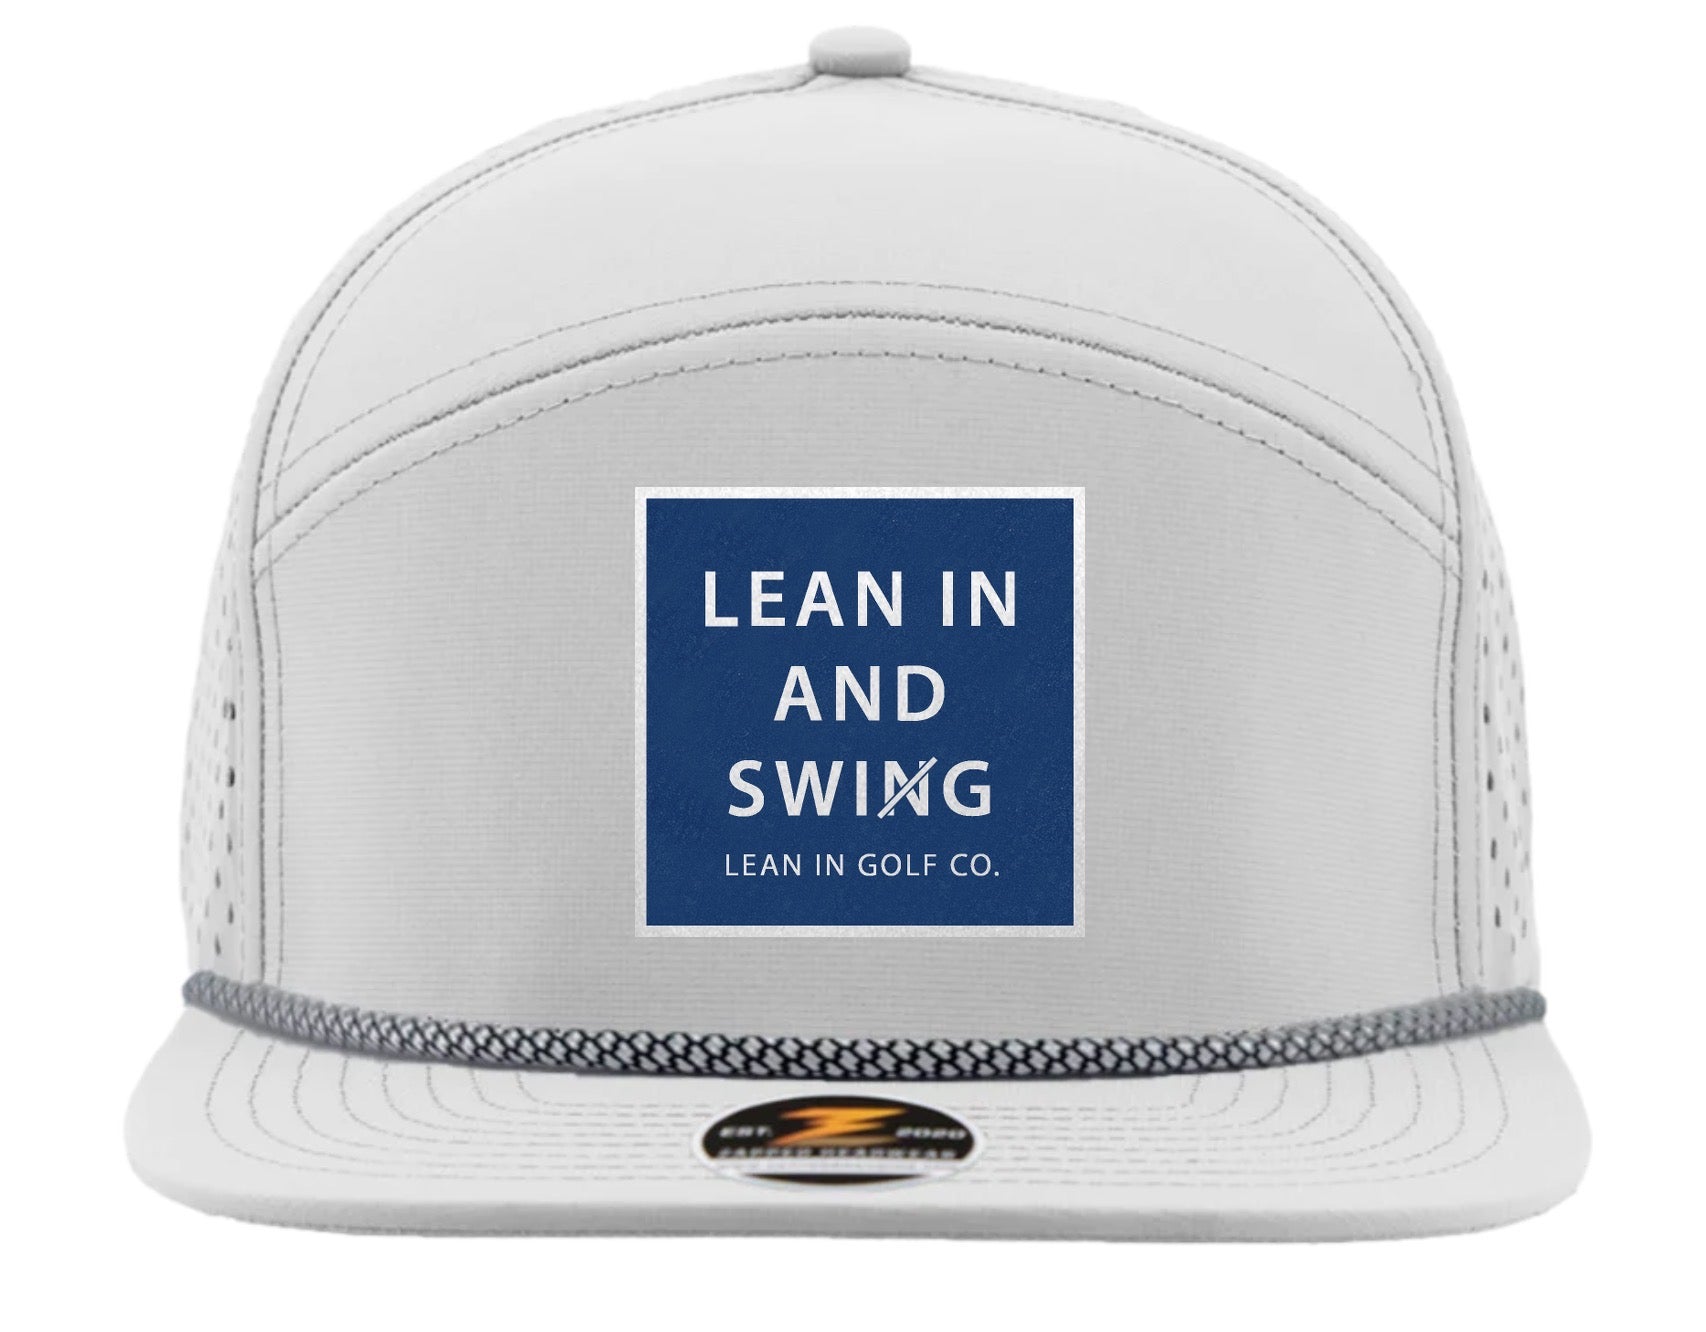 Lean in and Swig 7-panel White/Blue Moisture Wicking Rope Performance hat